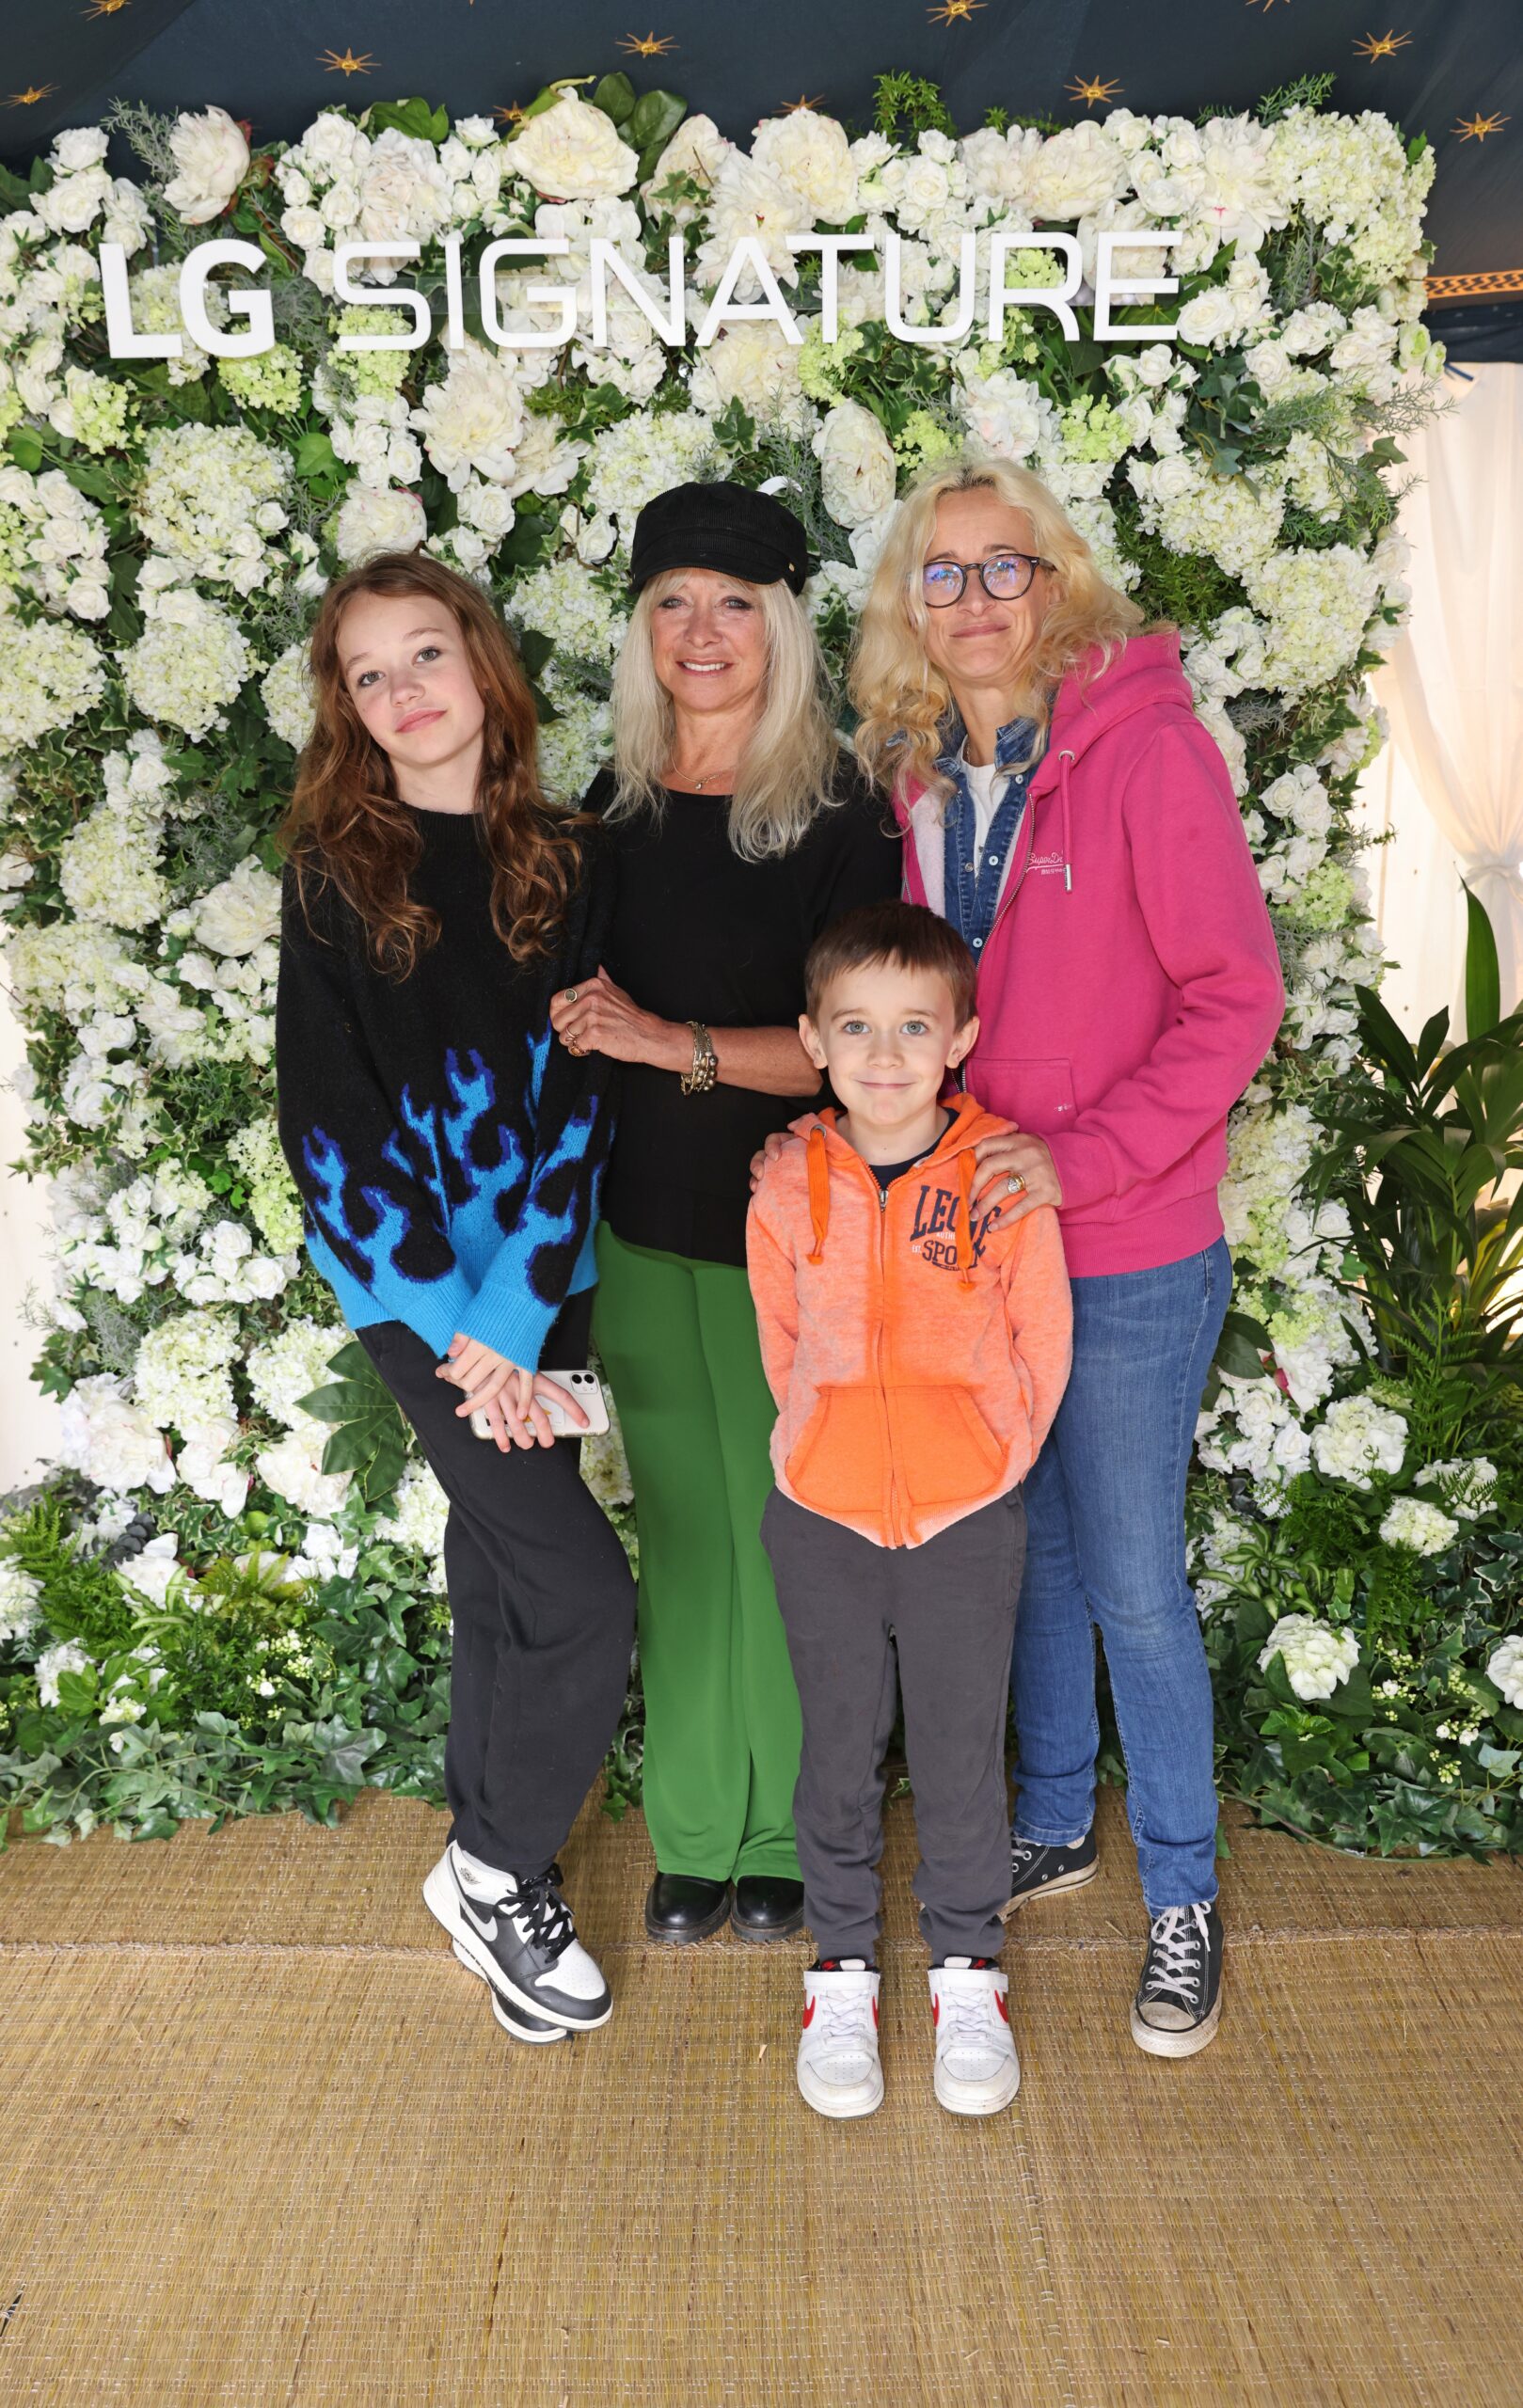 Jo Wood poses with her daughter and grandchildren in front of the LG SIGNATURE display.